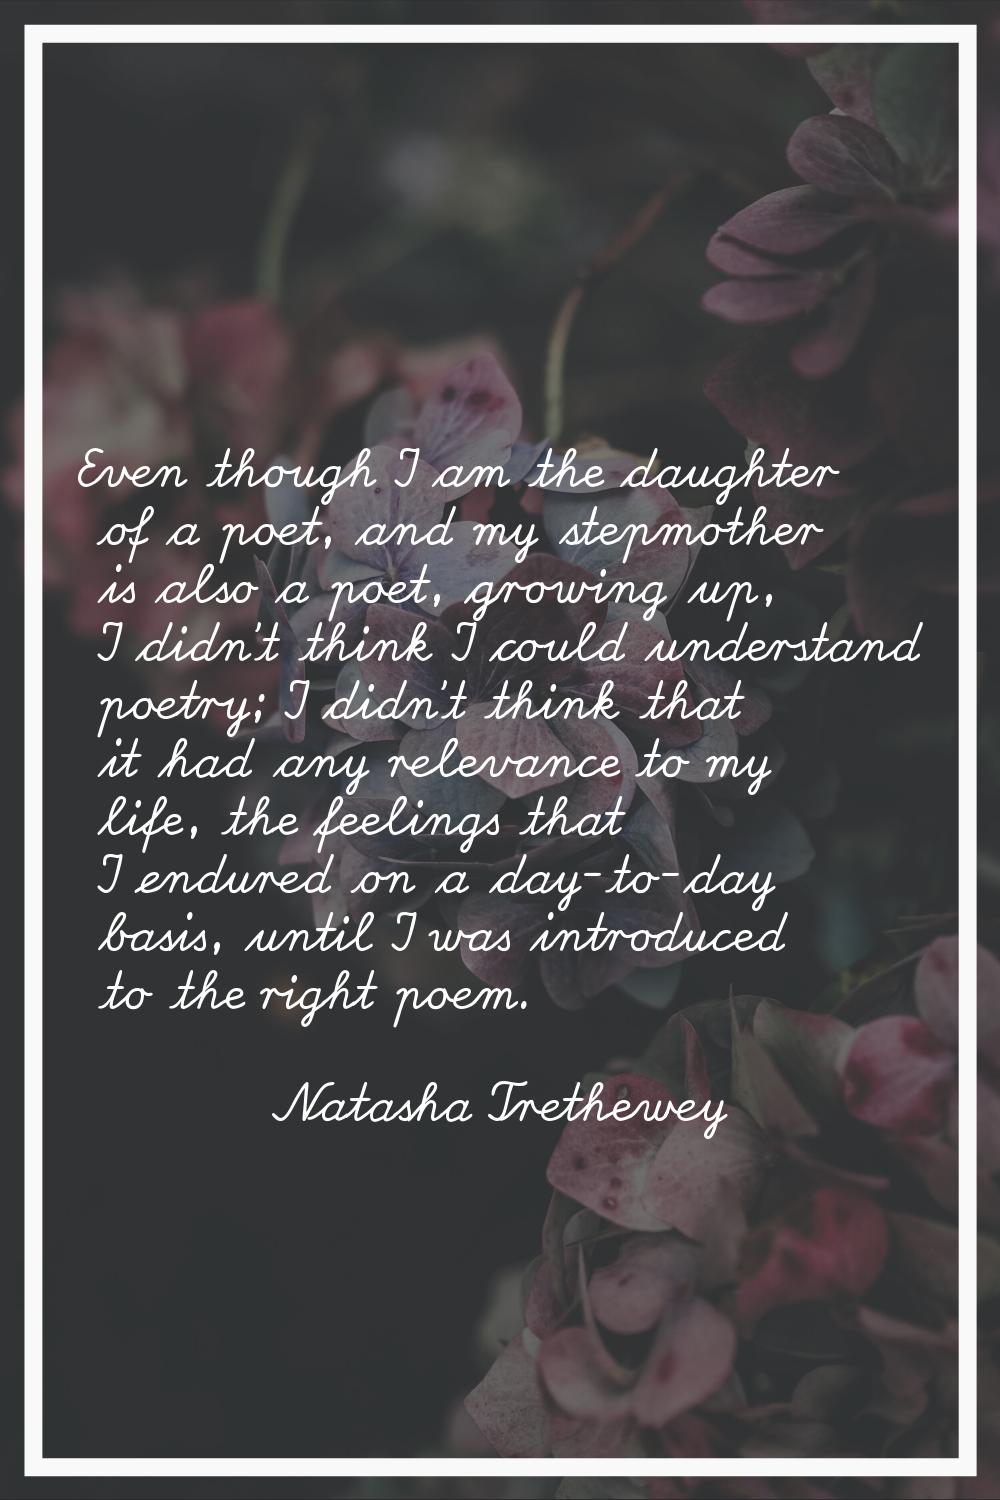 Even though I am the daughter of a poet, and my stepmother is also a poet, growing up, I didn't thi